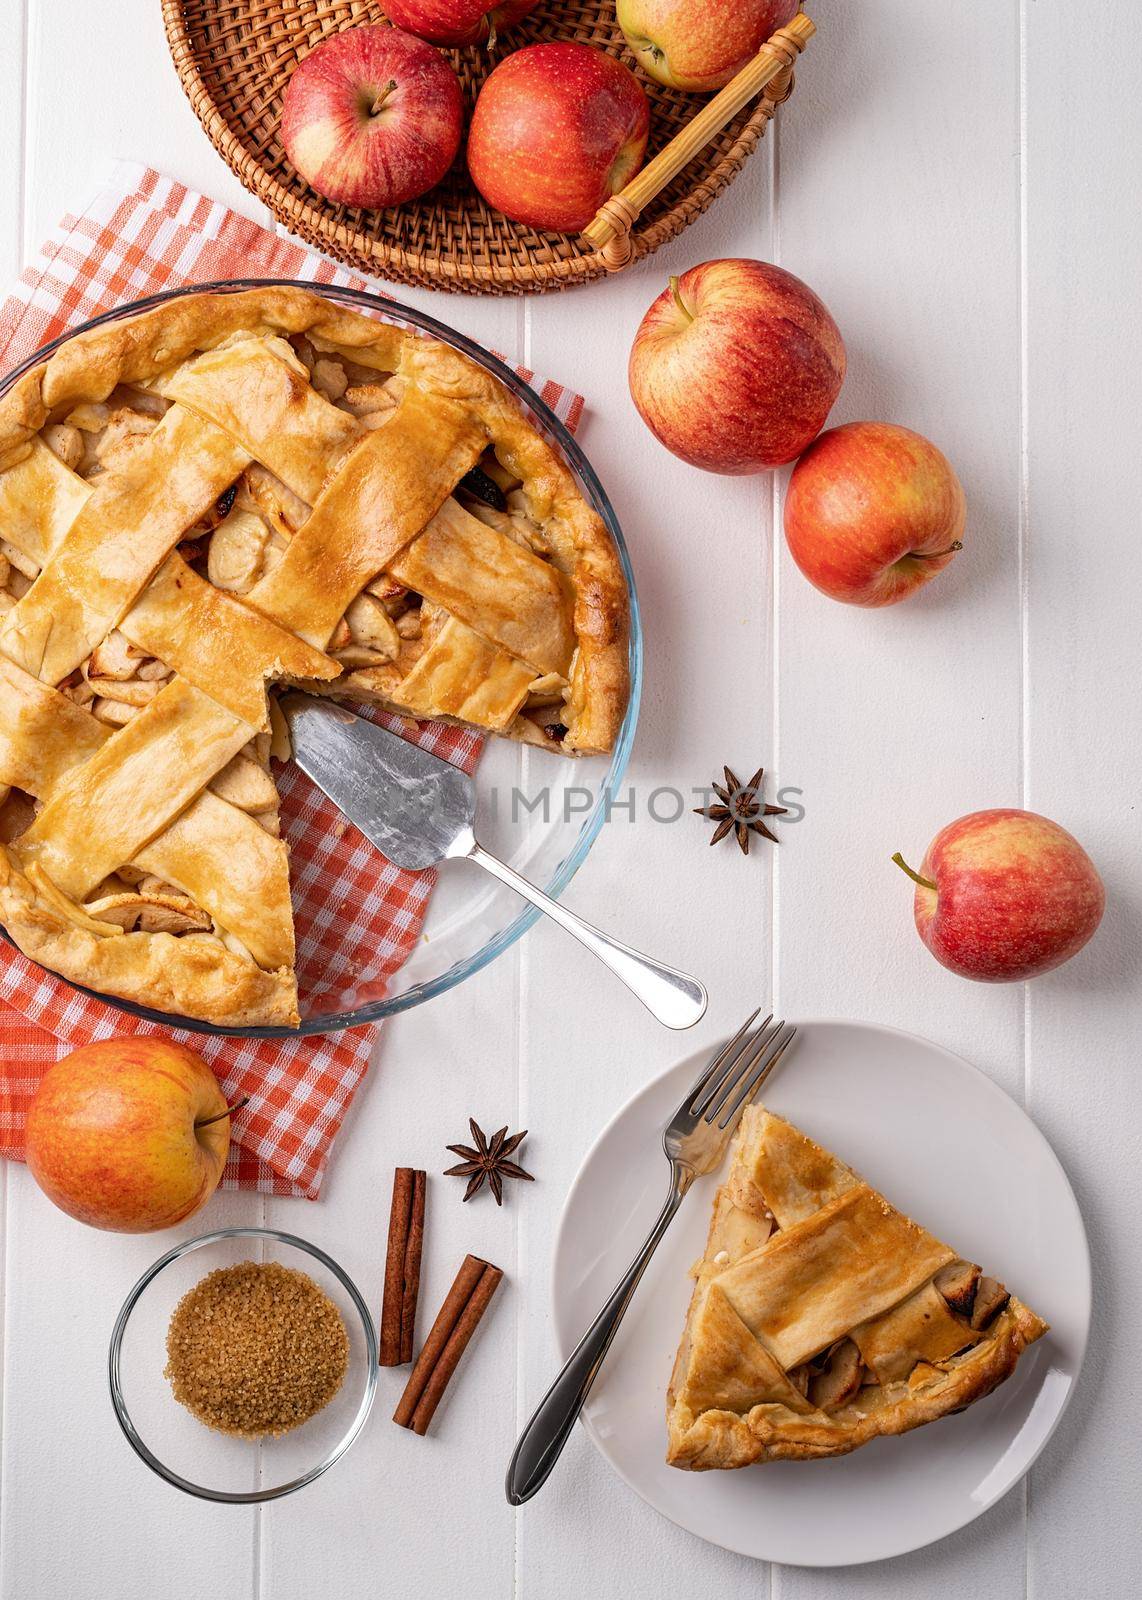 Autumn foods. Top view of homemade apple pie on white wooden table, decorated with apples, sugar and tablecloth